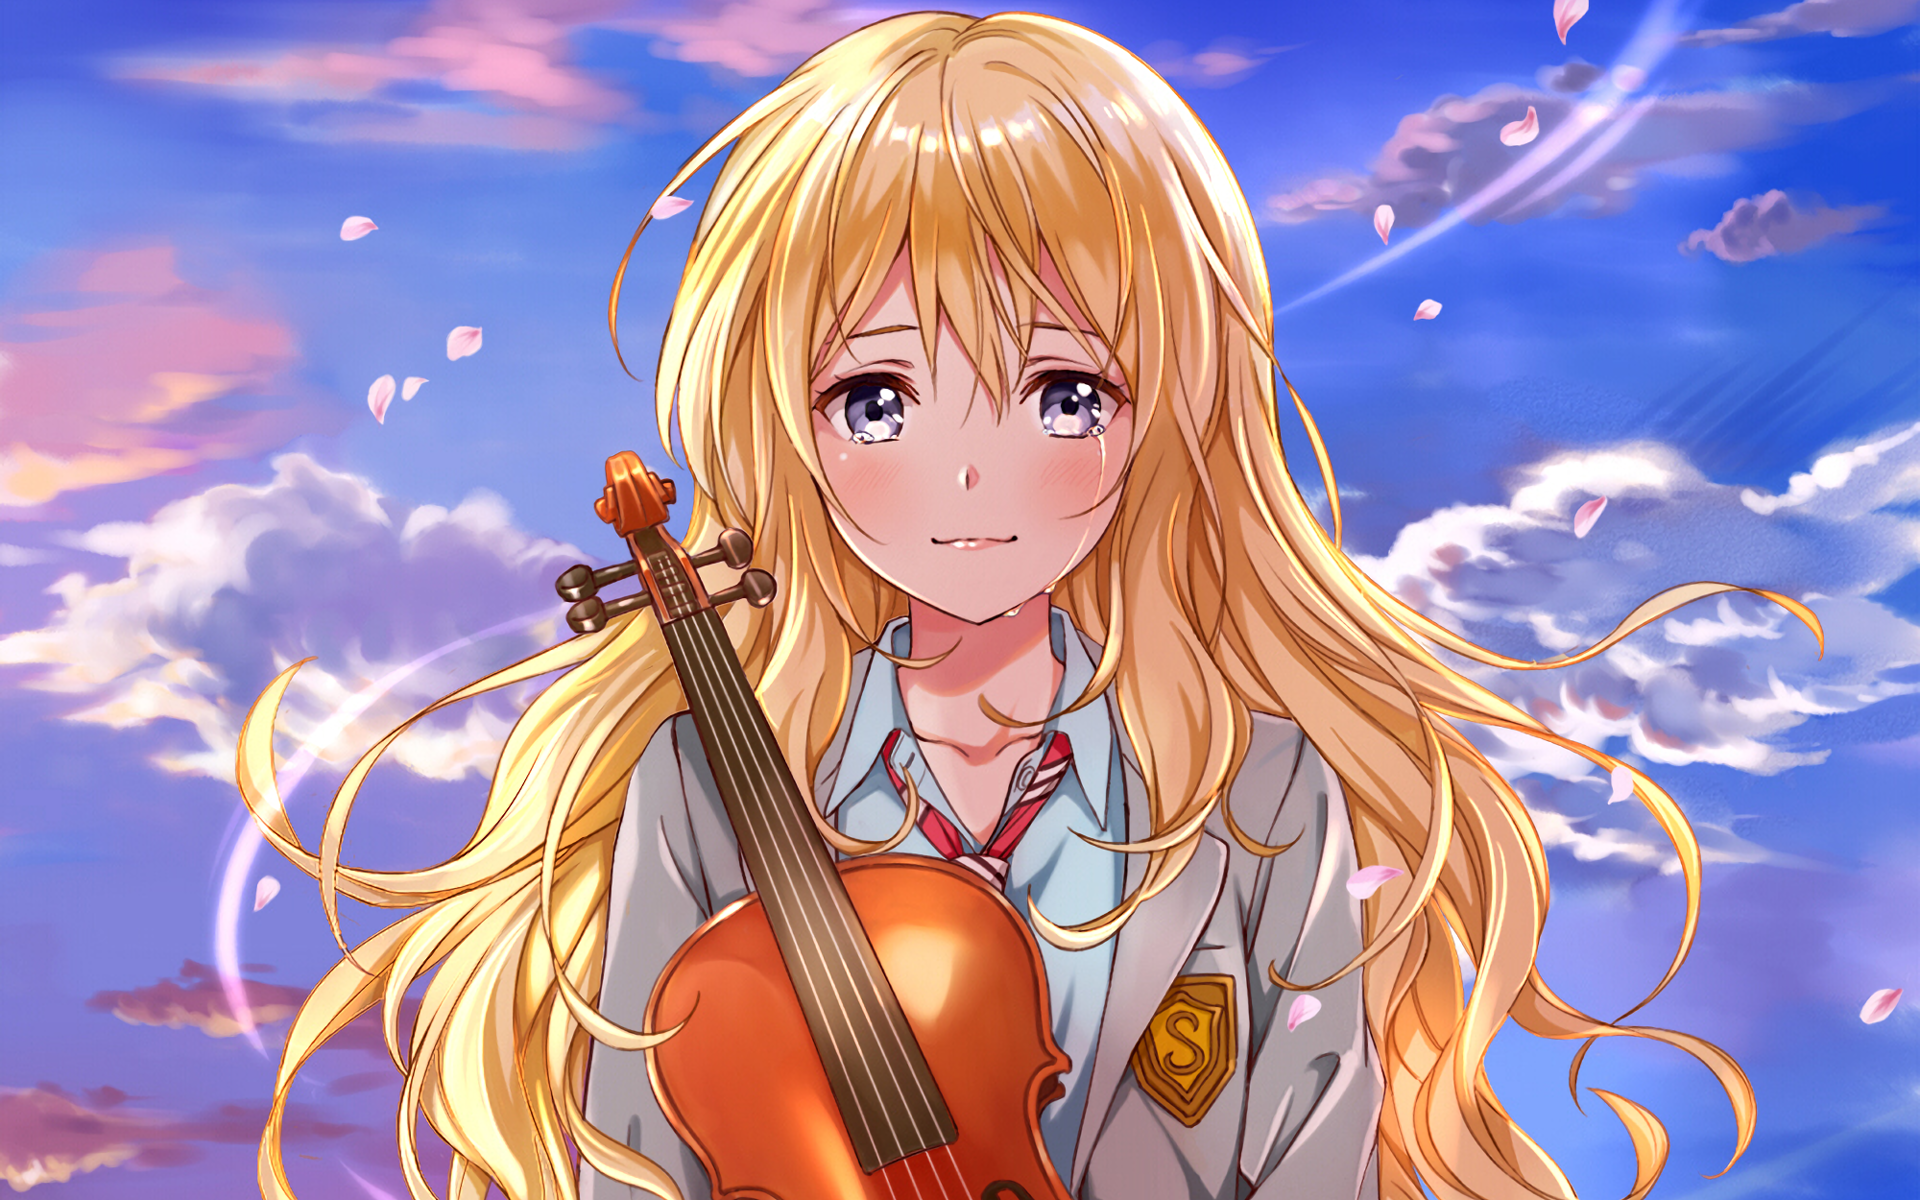 Your lie in april anime full series naxreengineering